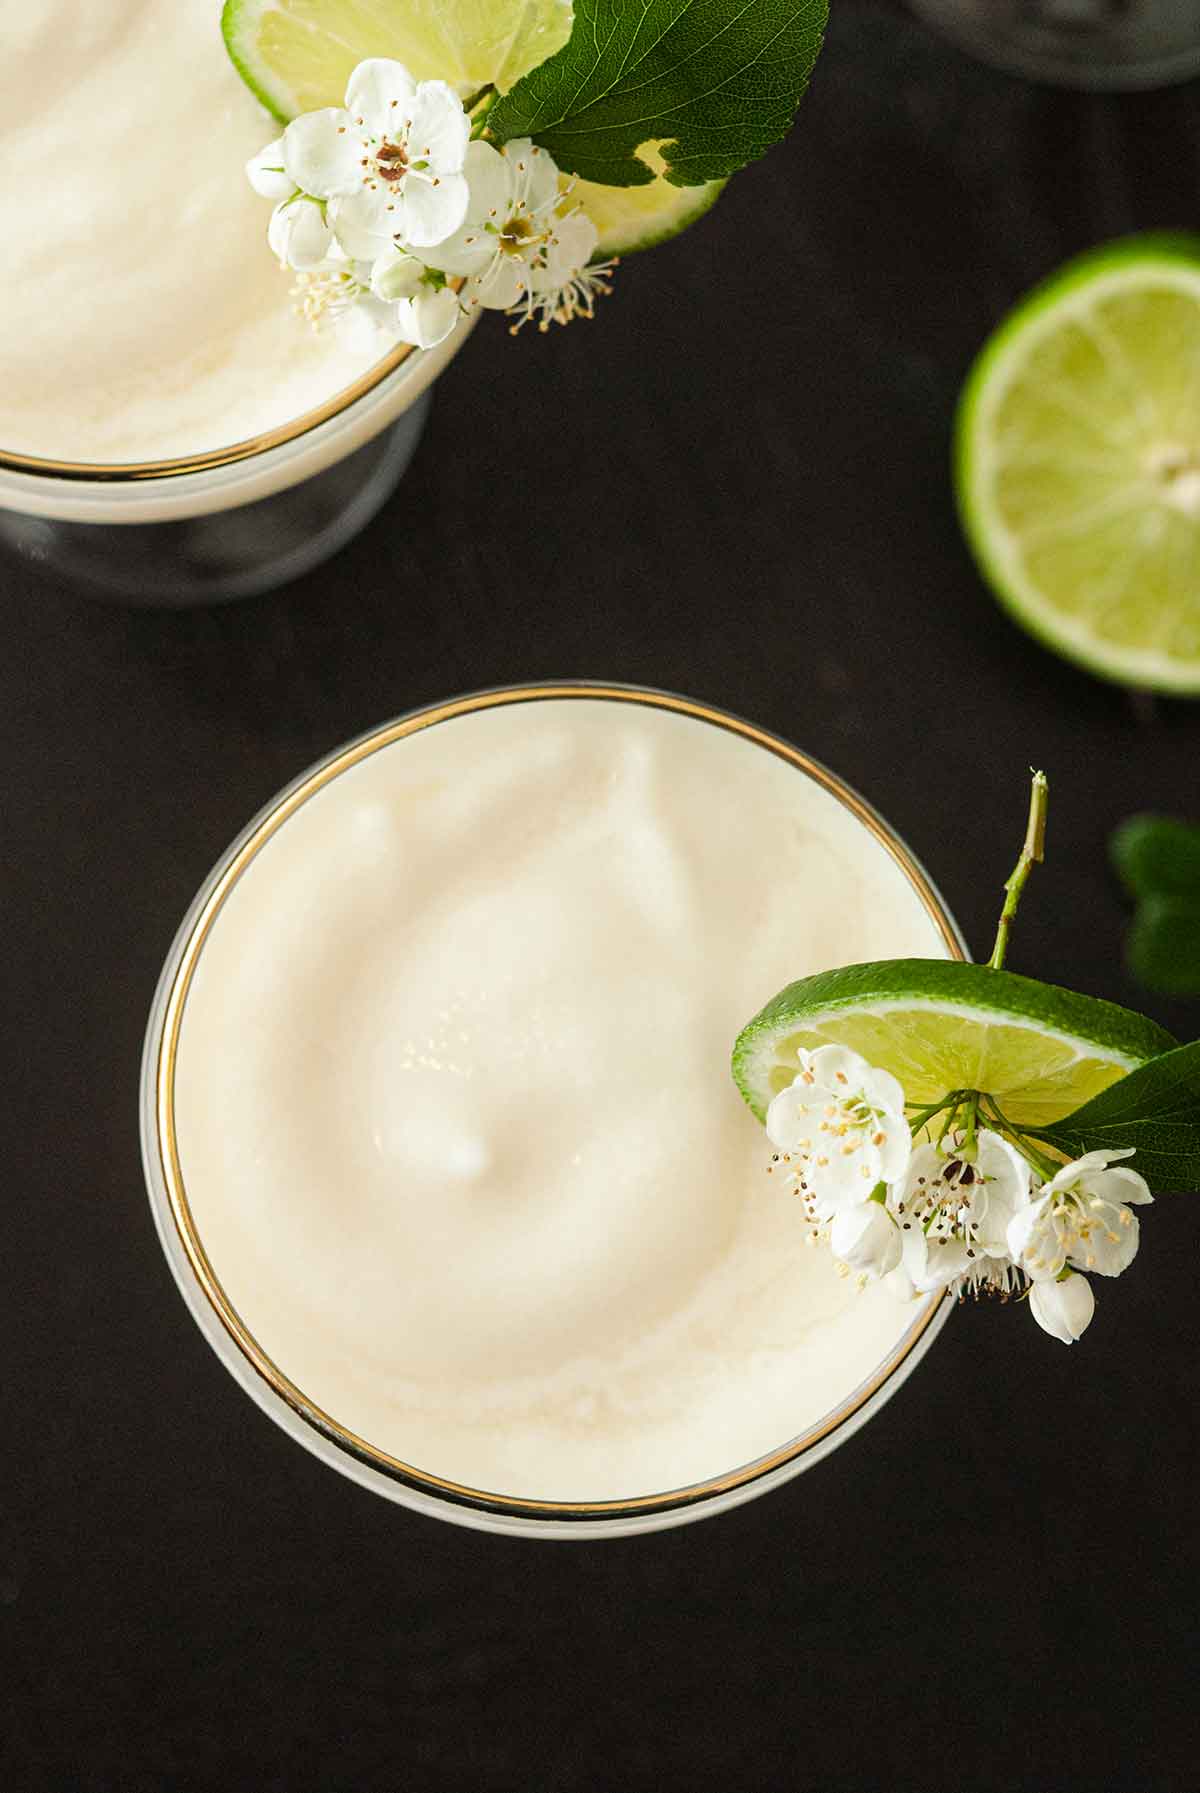 The tops of 2 piña coladas with lime-flower garnishes on a table with a slice of lime.